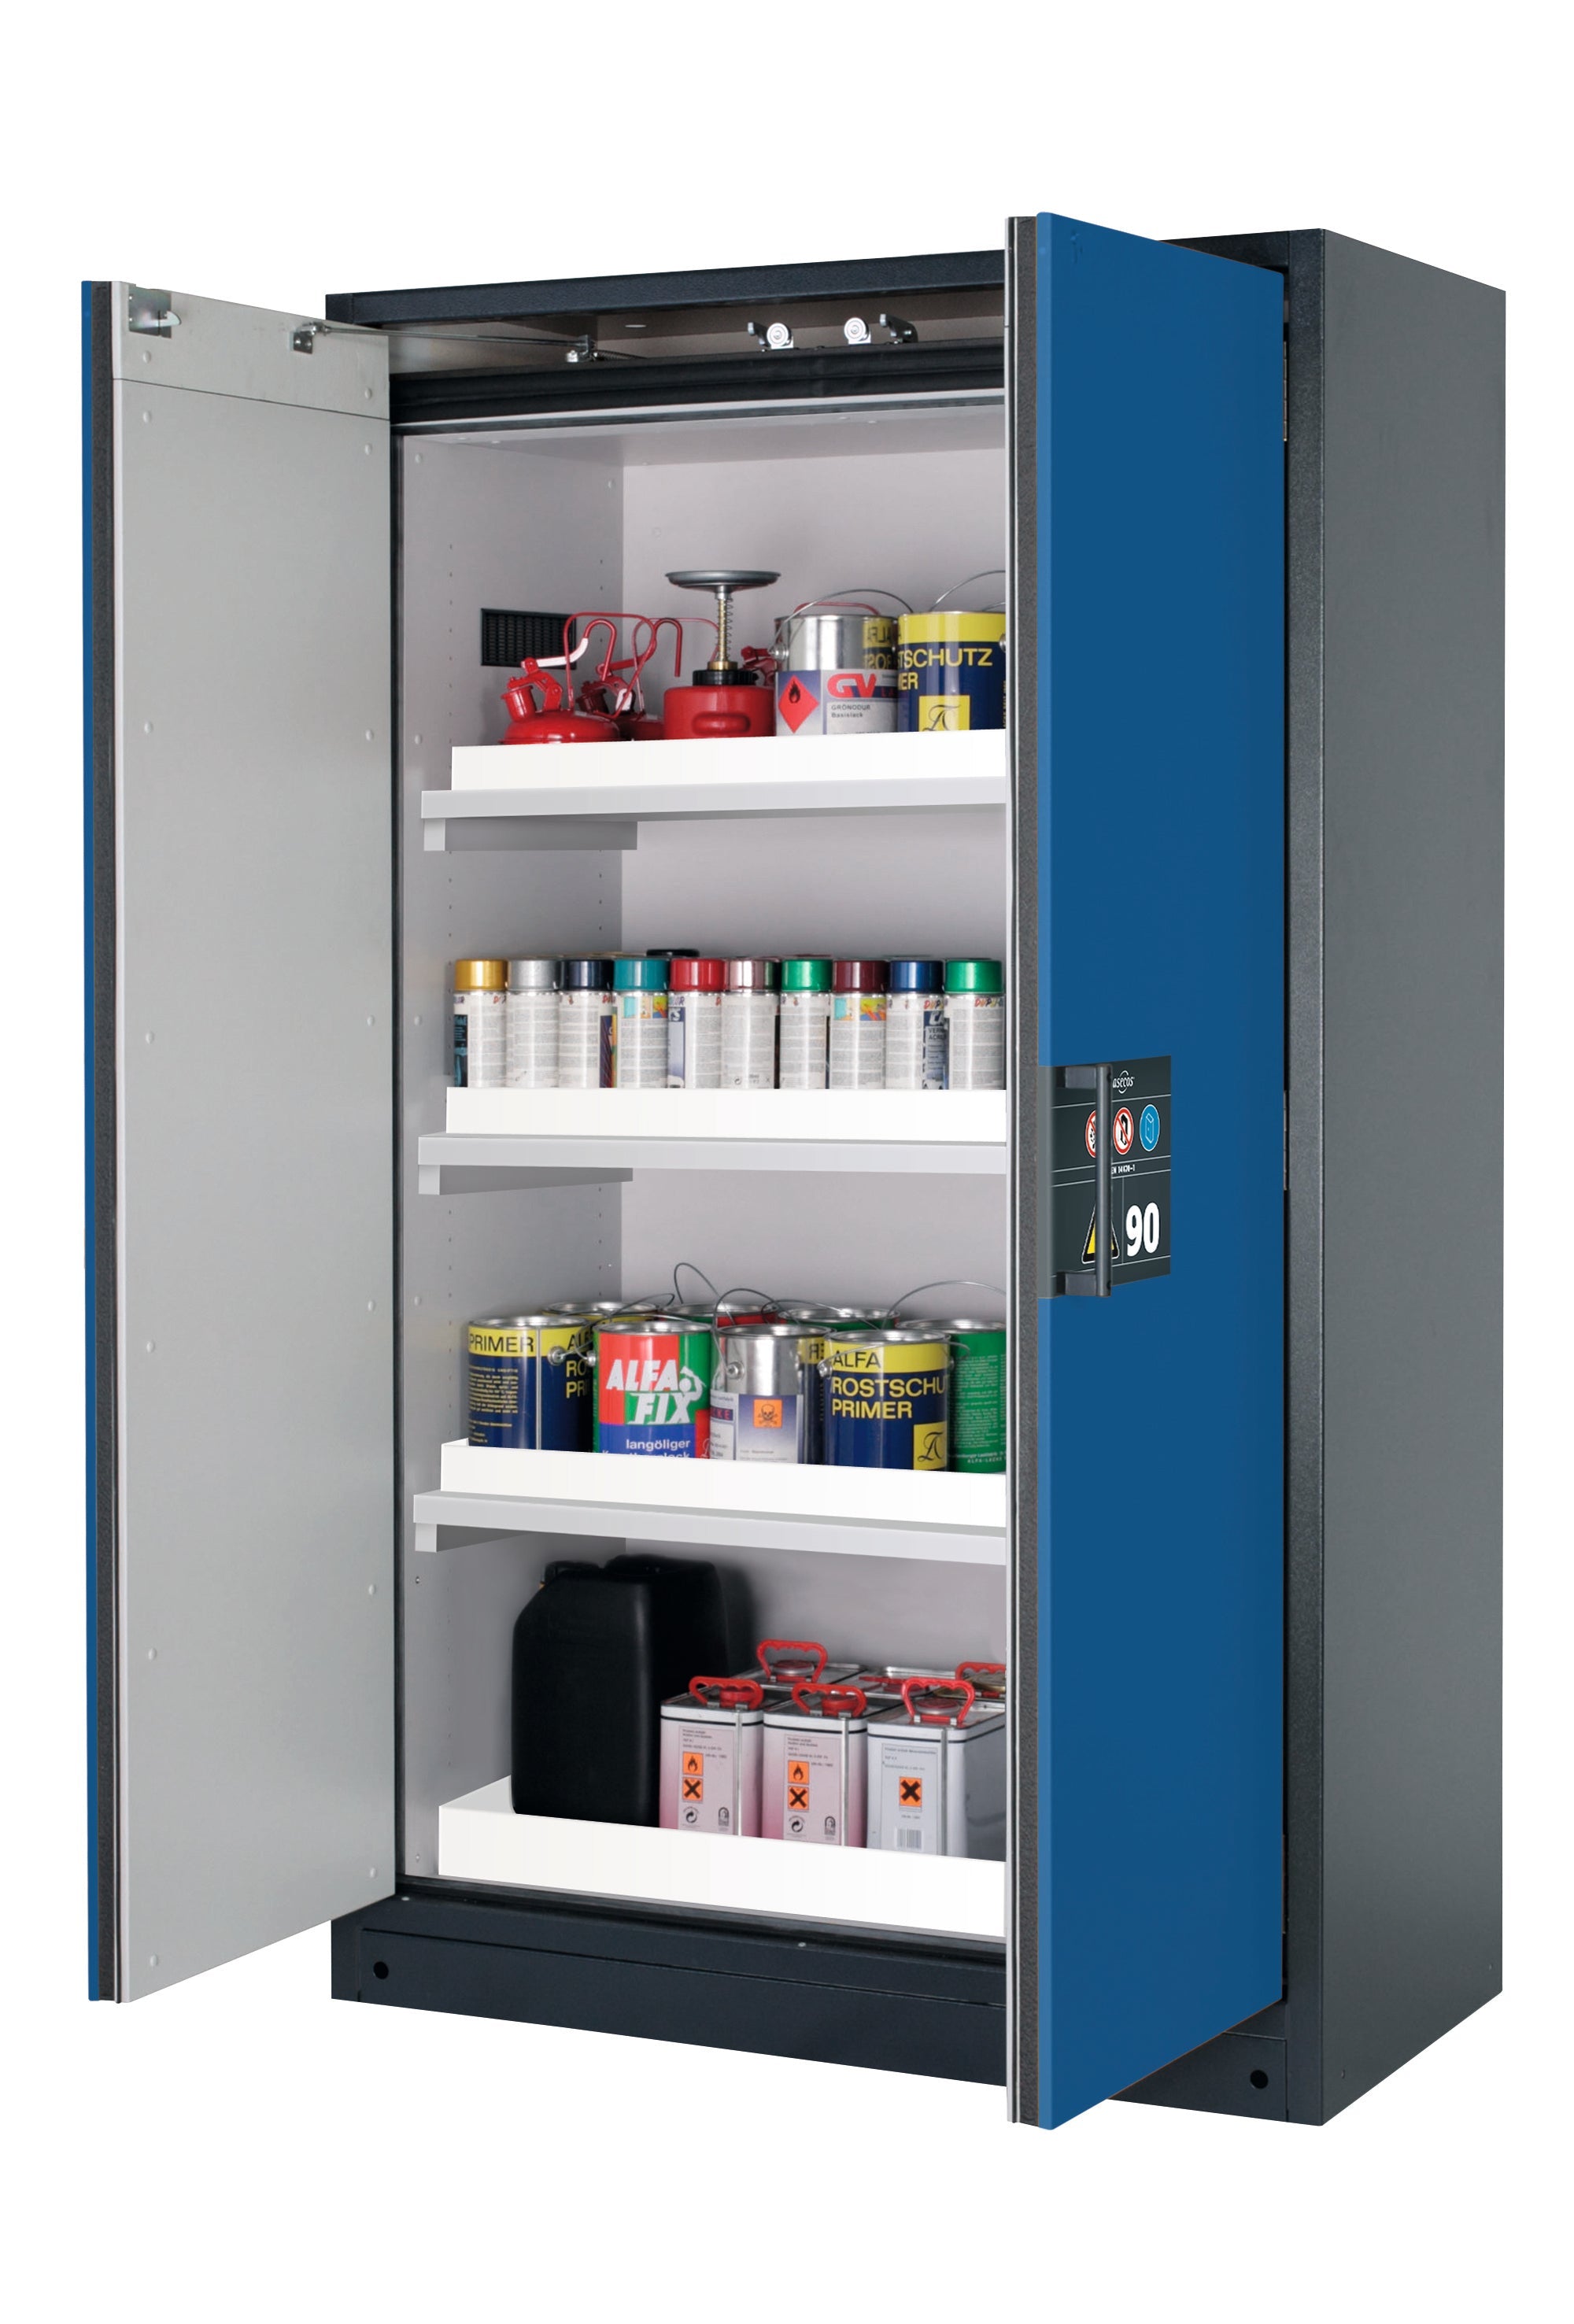 Type 90 safety storage cabinet Q-CLASSIC-90 model Q90.195.120 in gentian blue RAL 5010 with 3x tray shelf (standard) (polypropylene),